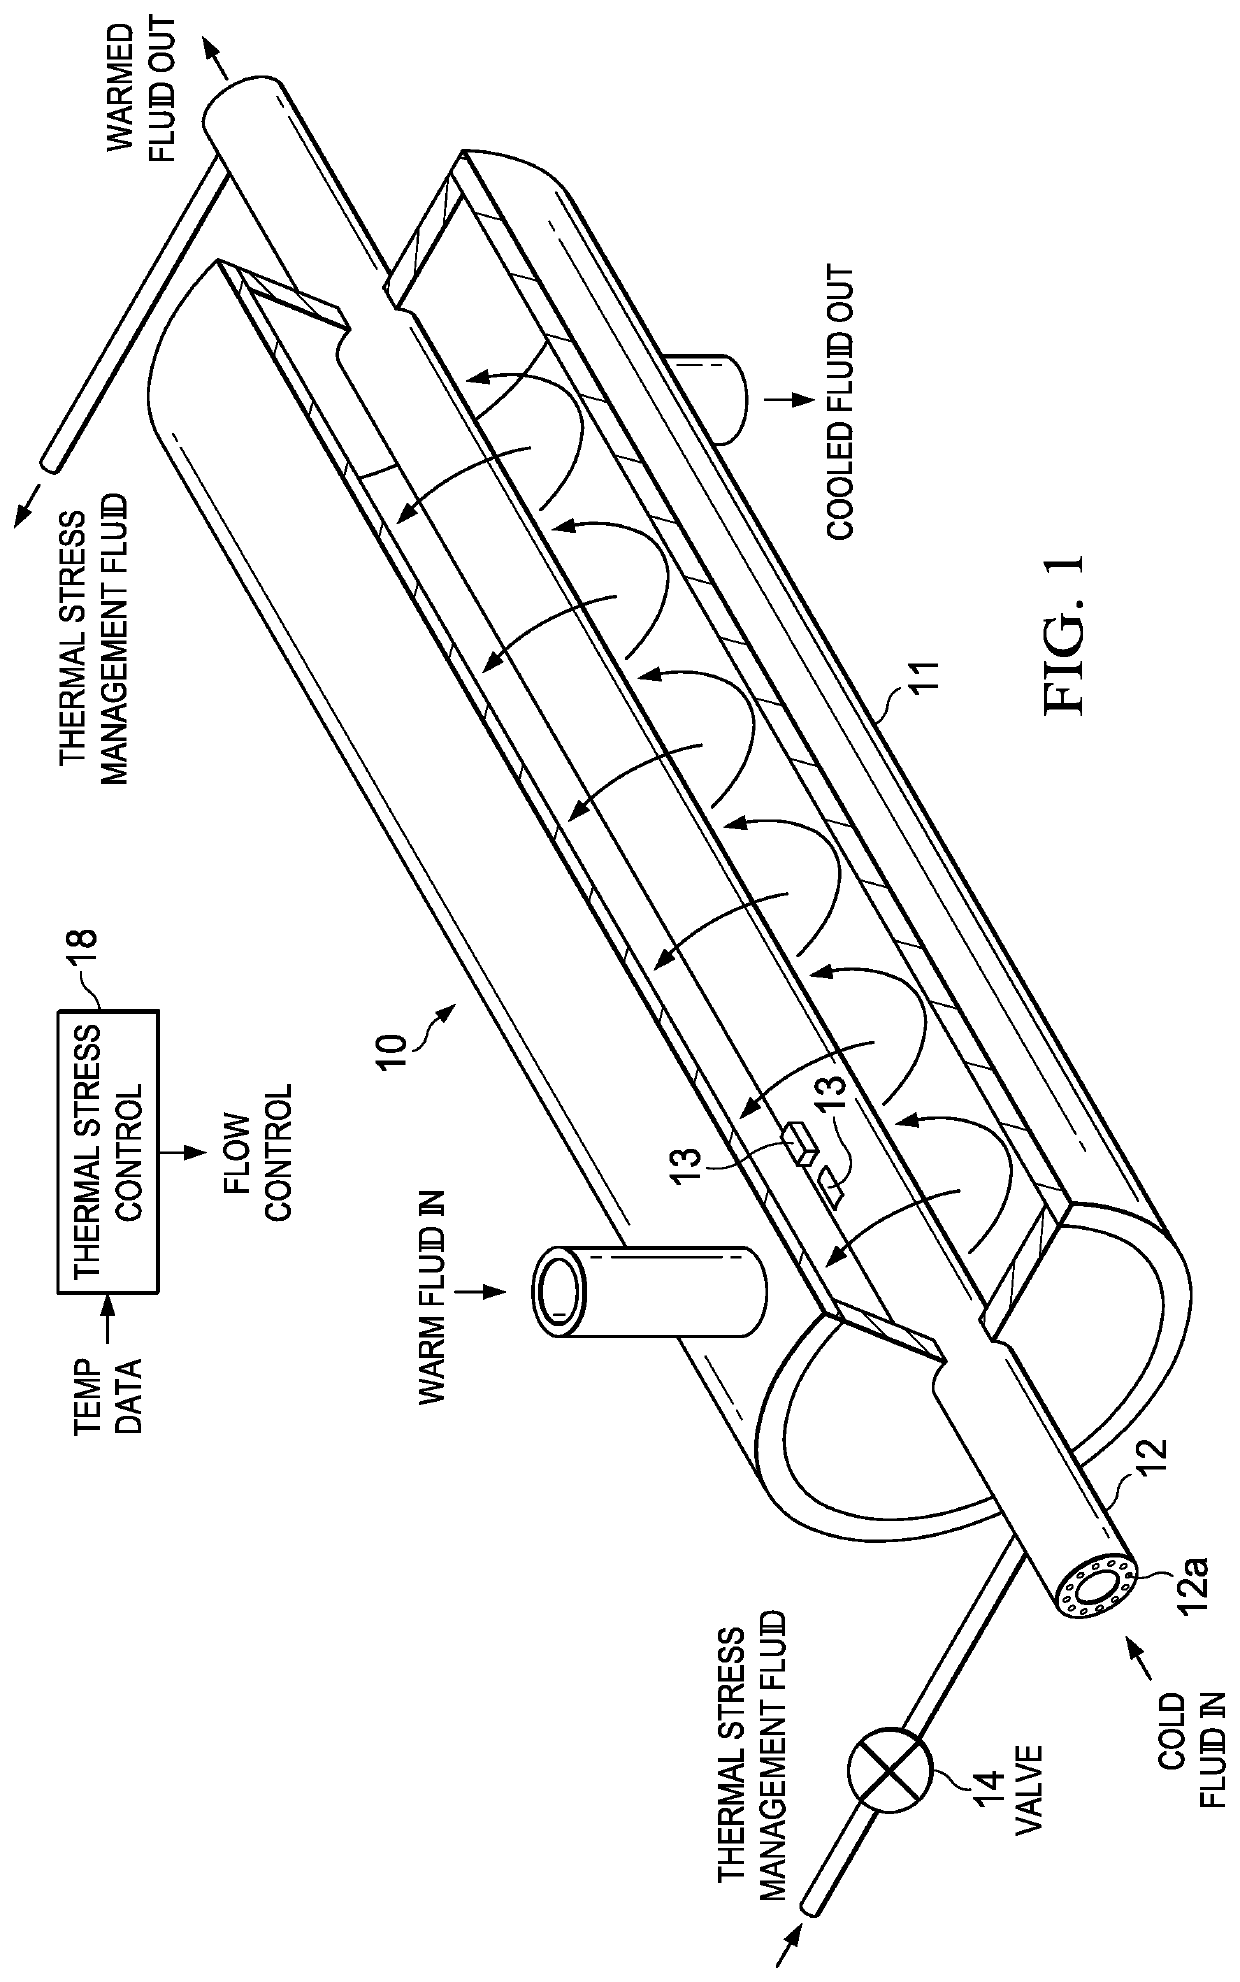 Thermal stress management for heat exchangers, pressure vessels, and other fluid-carrying or fluid-containing structures with high temperature transients